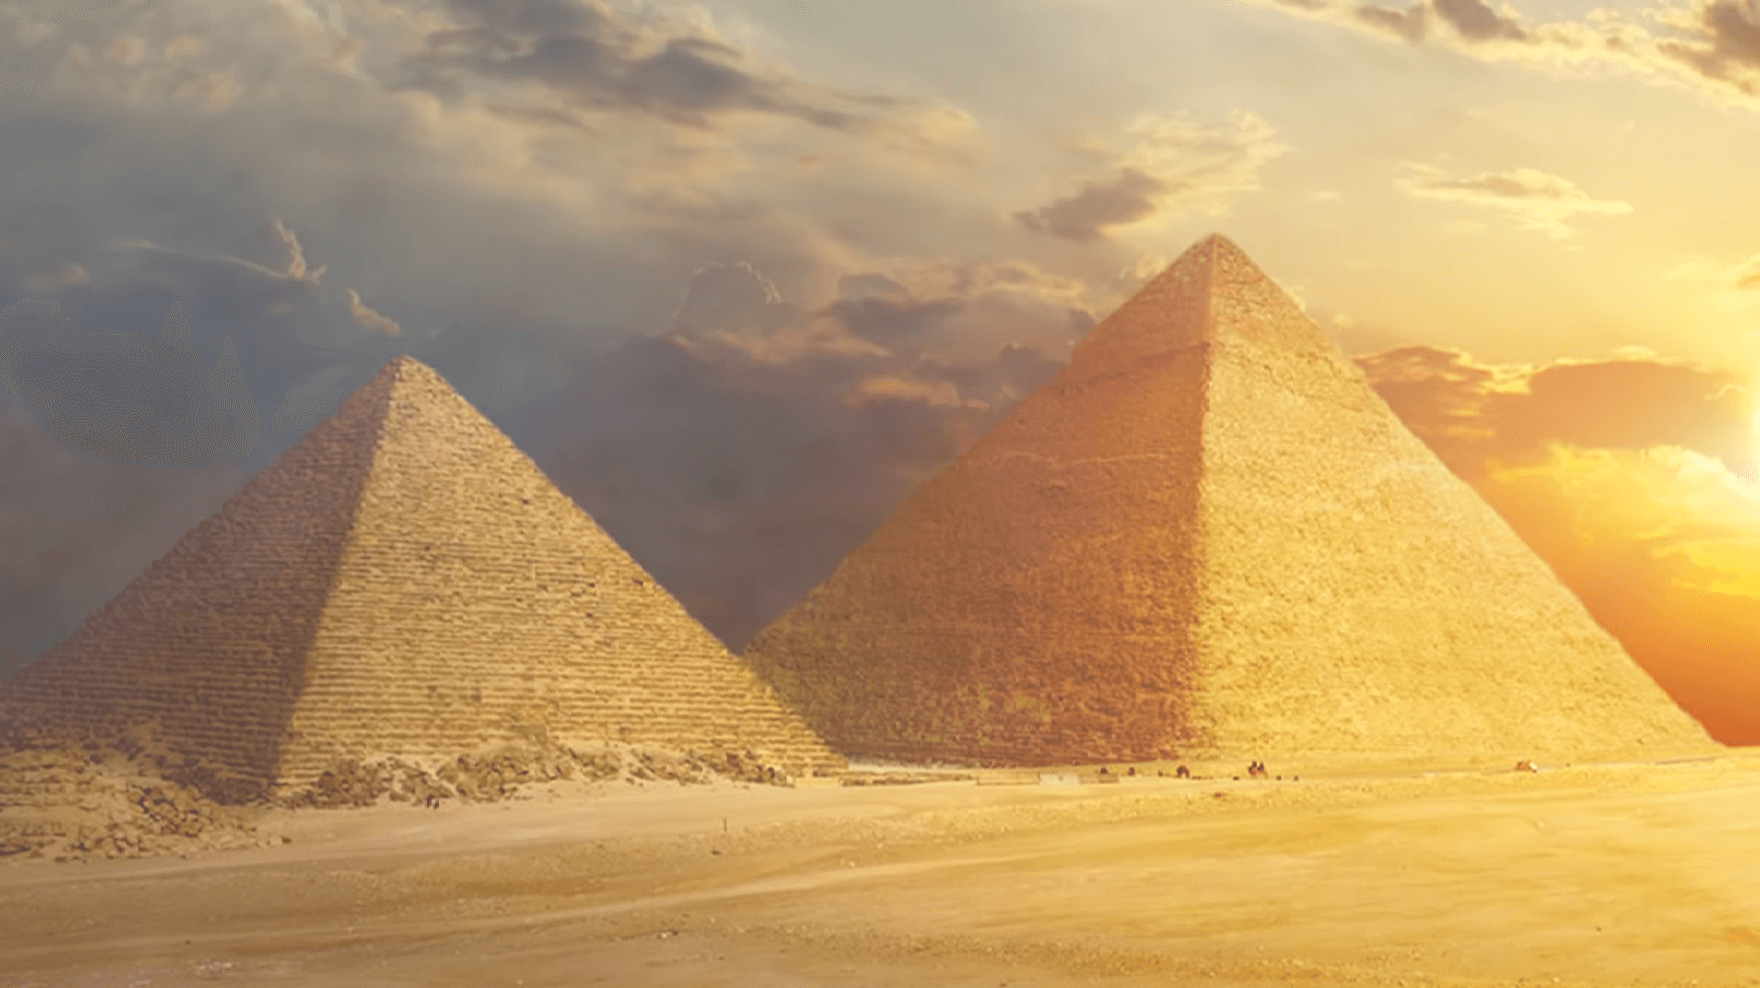 The Egyptian pyramids are ancient pyramid-shaped masonry structures located in Egypt. As of November 2008, sources cite either 118 or 138 as the number of identified Egyptian pyramids. Most were built as tombs for the country's pharaohs and their consorts during the Old and Middle Kingdom periods.